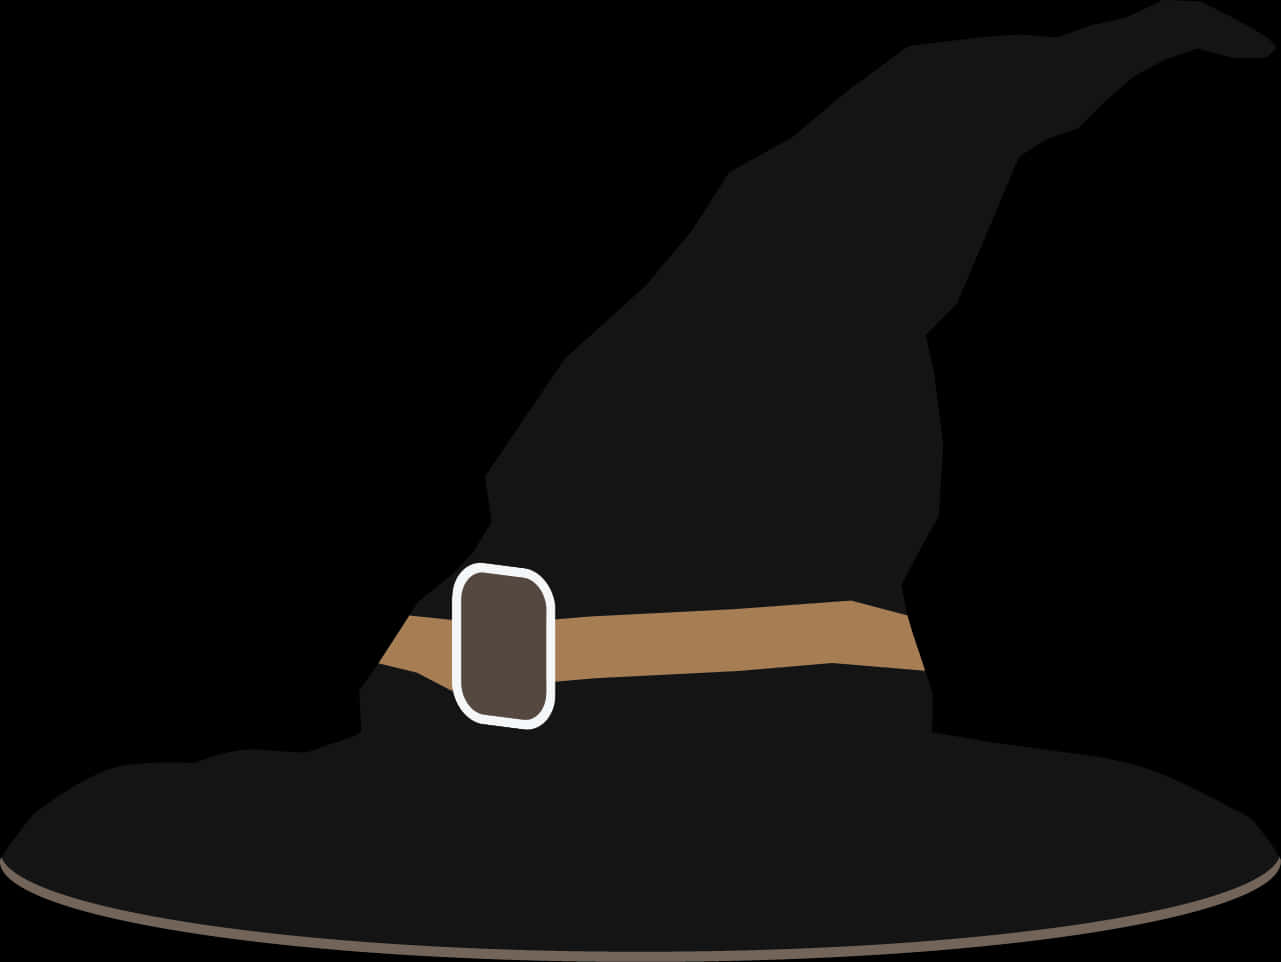 Classic Witch Hat Illustration PNG image